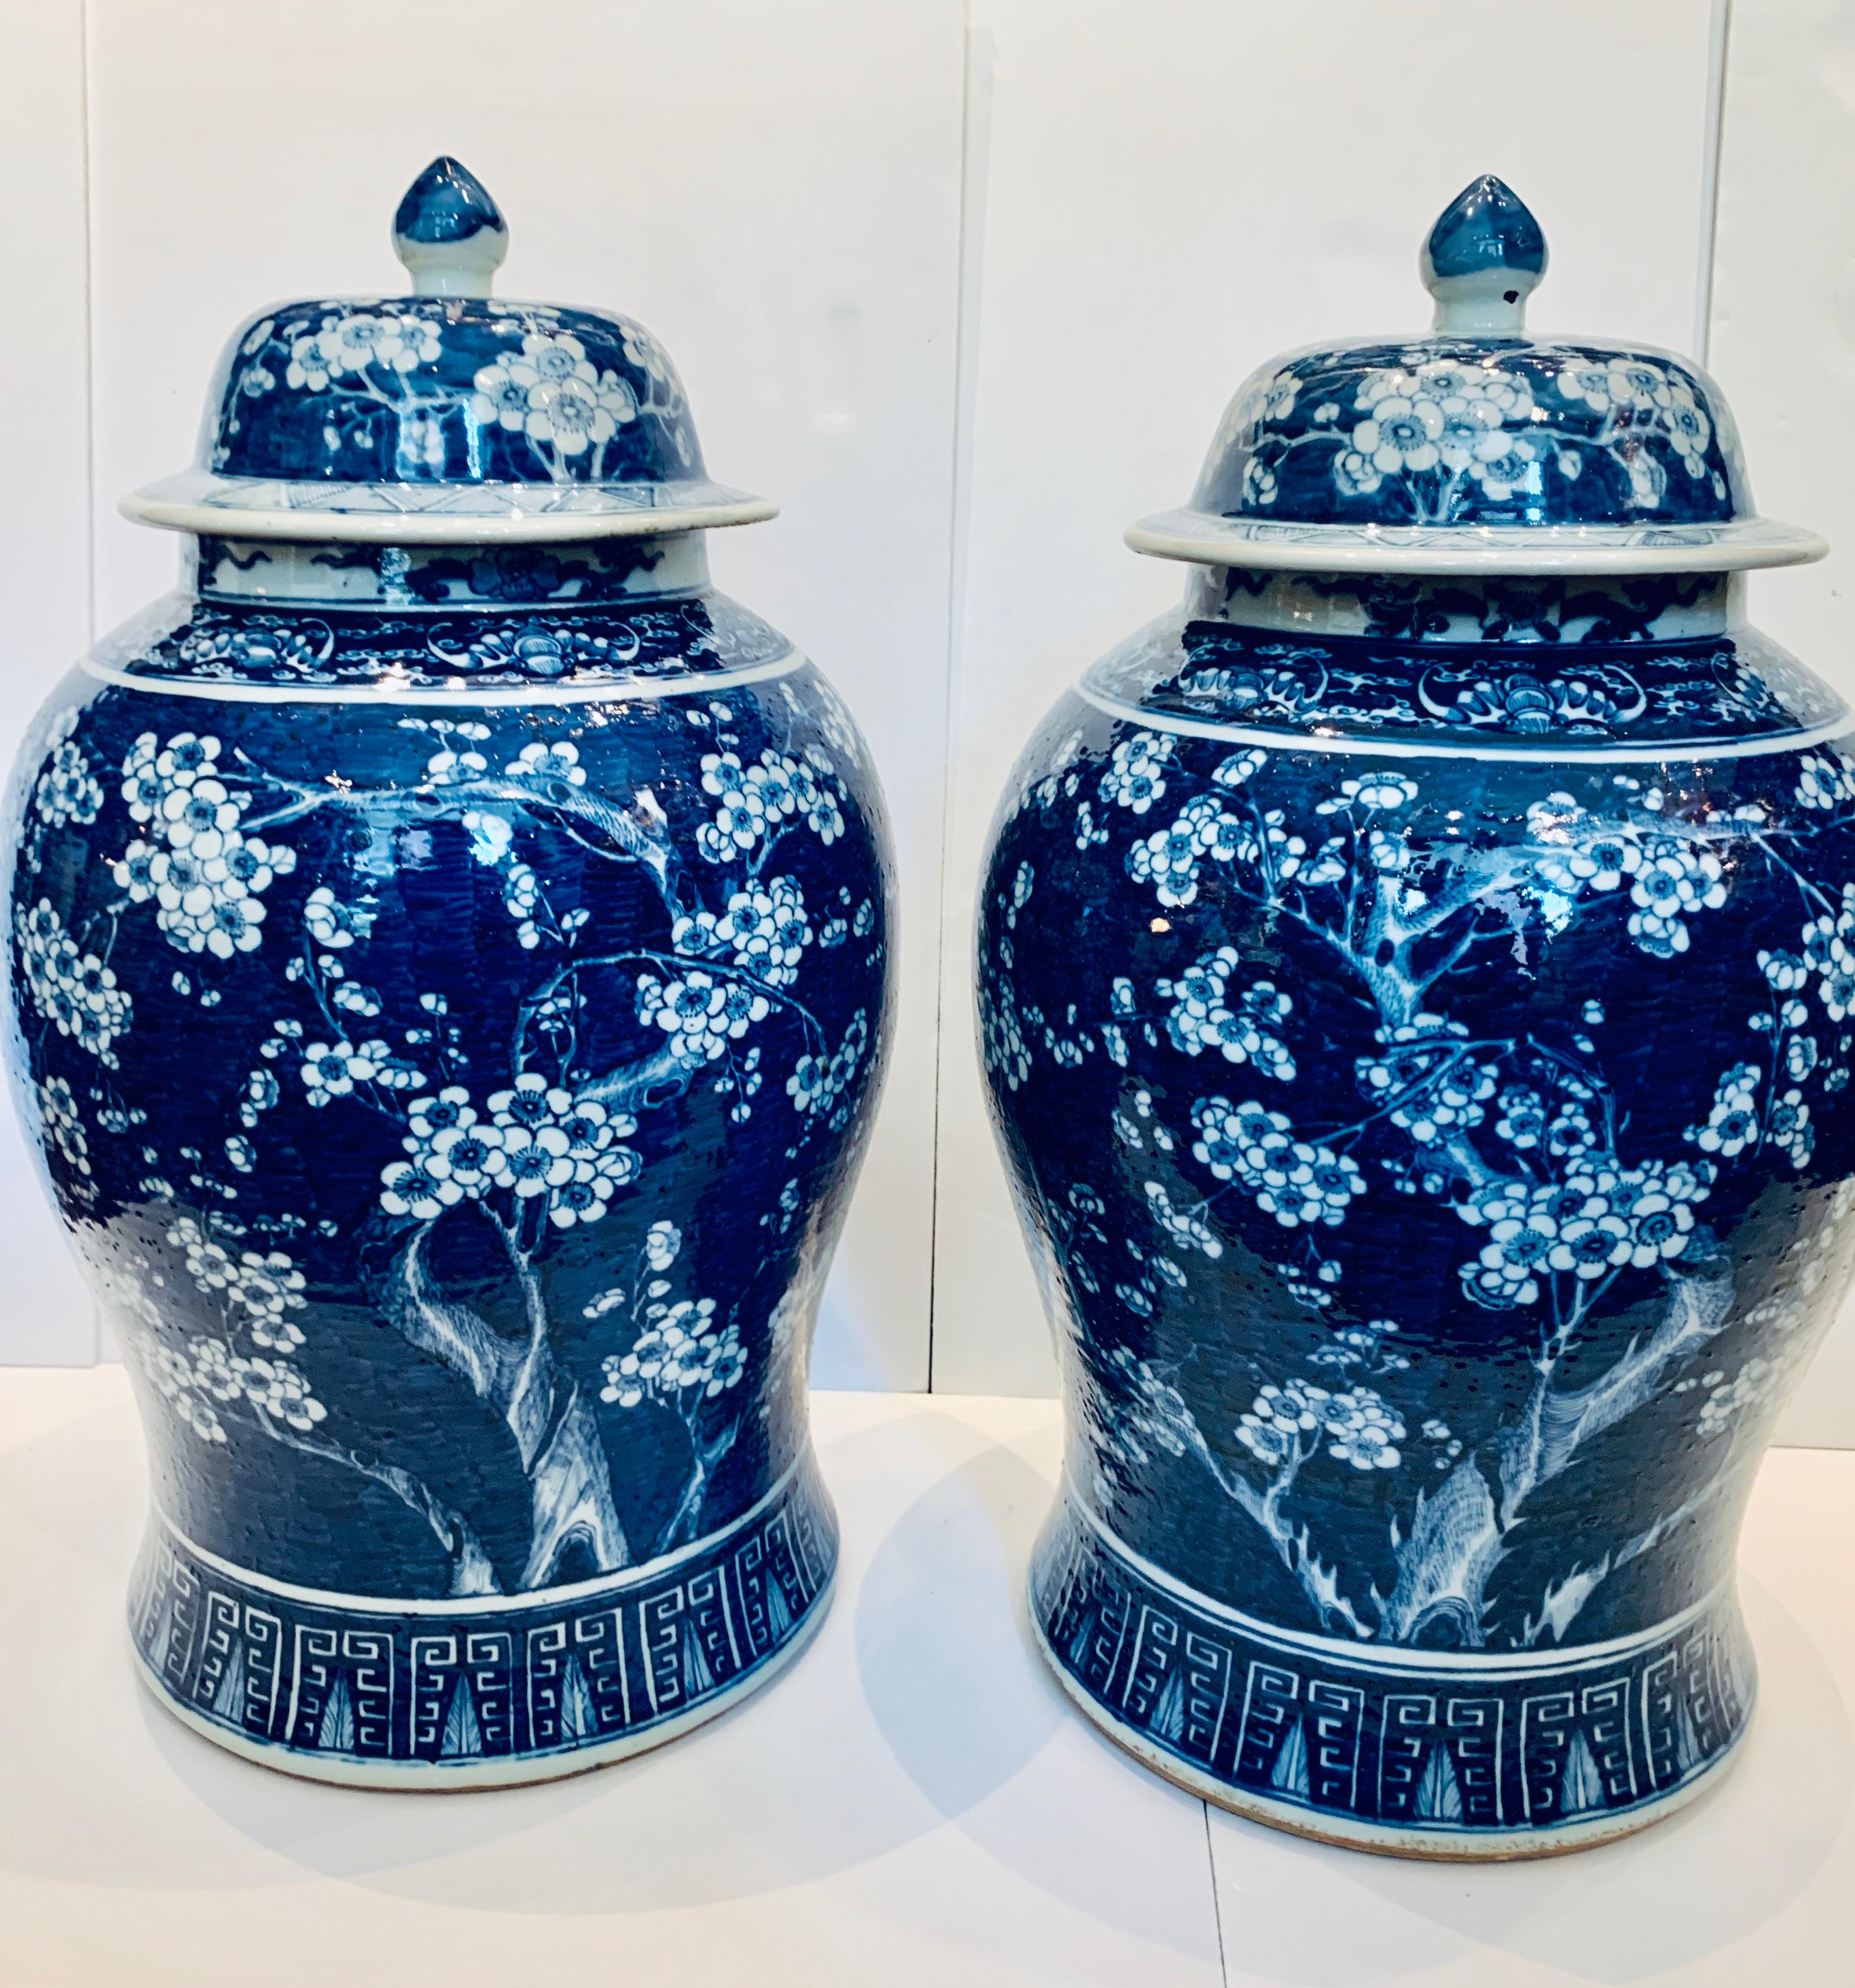 Why We Love It: Crisp white flowers on deep blue
This pair of large blue and white antique Chinese porcelain jars has exquisite decoration. The jars were hand painted in the Qing dynasty in the second half of the 19th century. We see crisp white